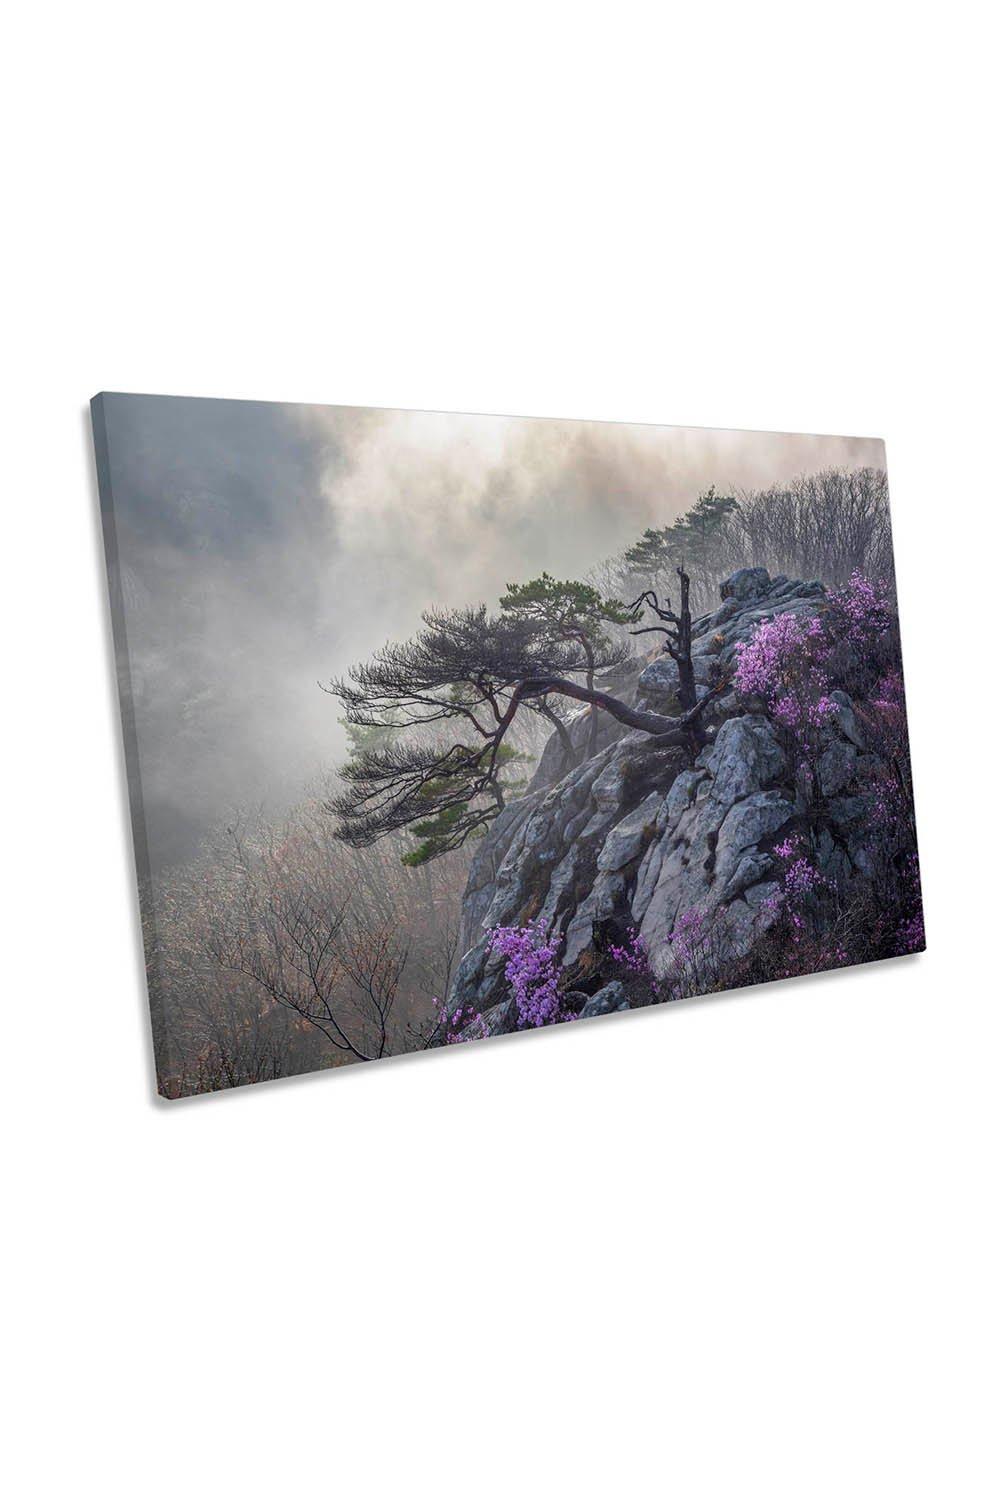 Life and Death Spring Flower Mountain Canvas Wall Art Picture Print